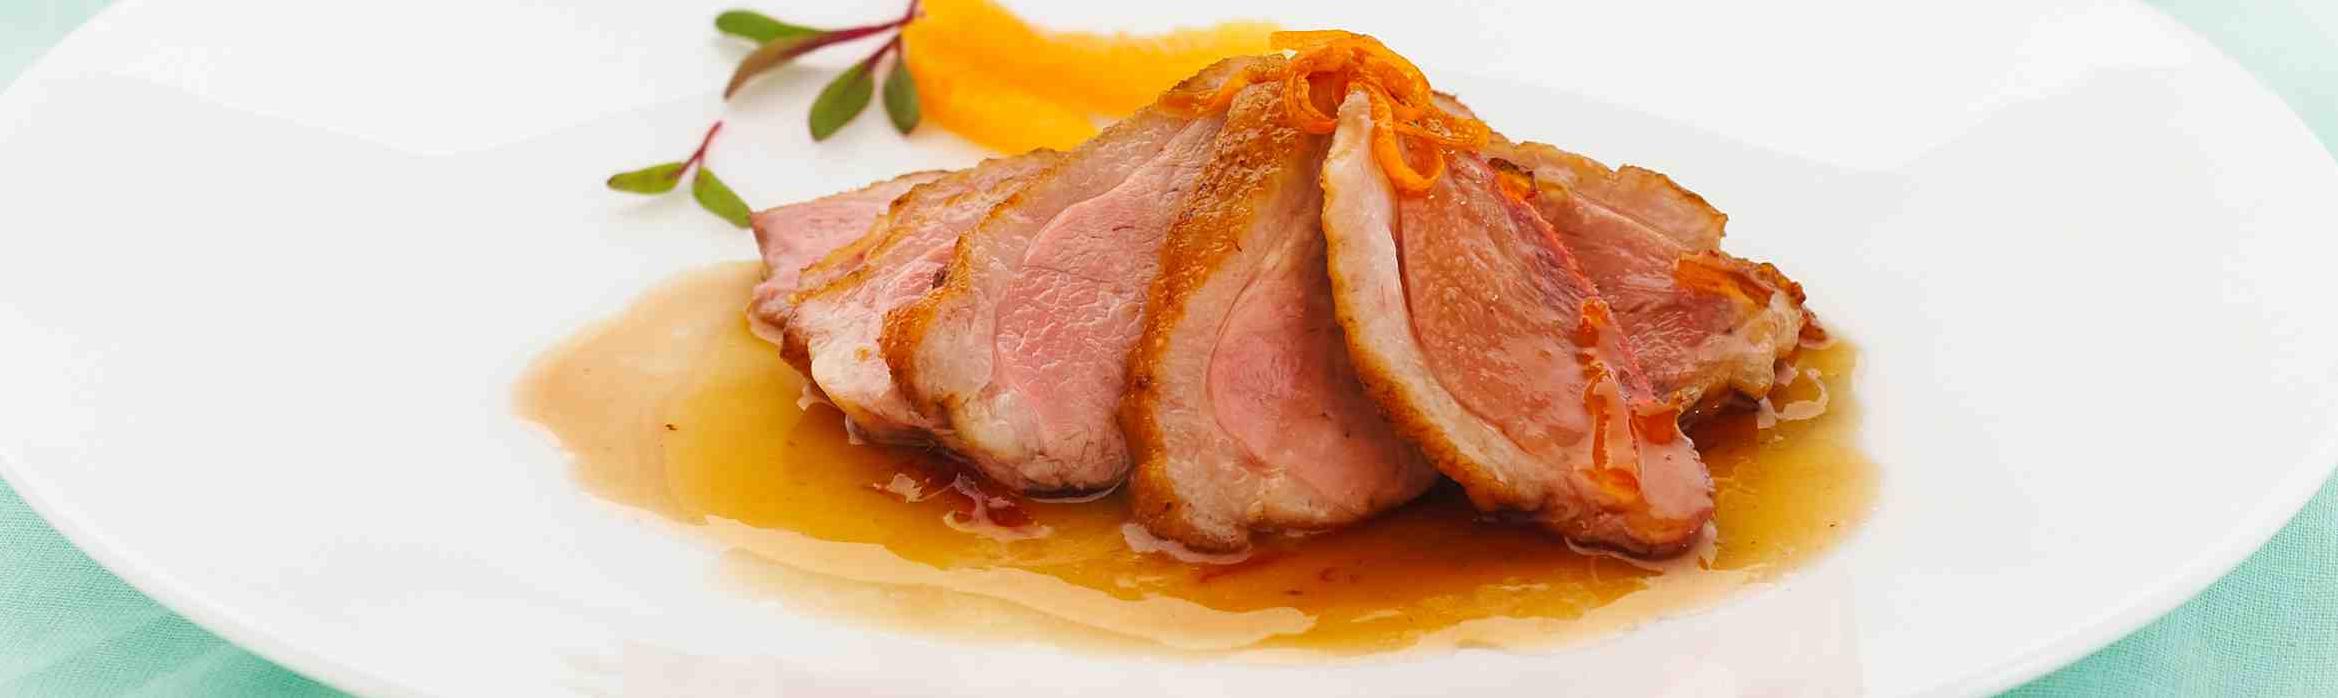  Succulent duck breasts bathing in a divine wine and marmalade sauce.